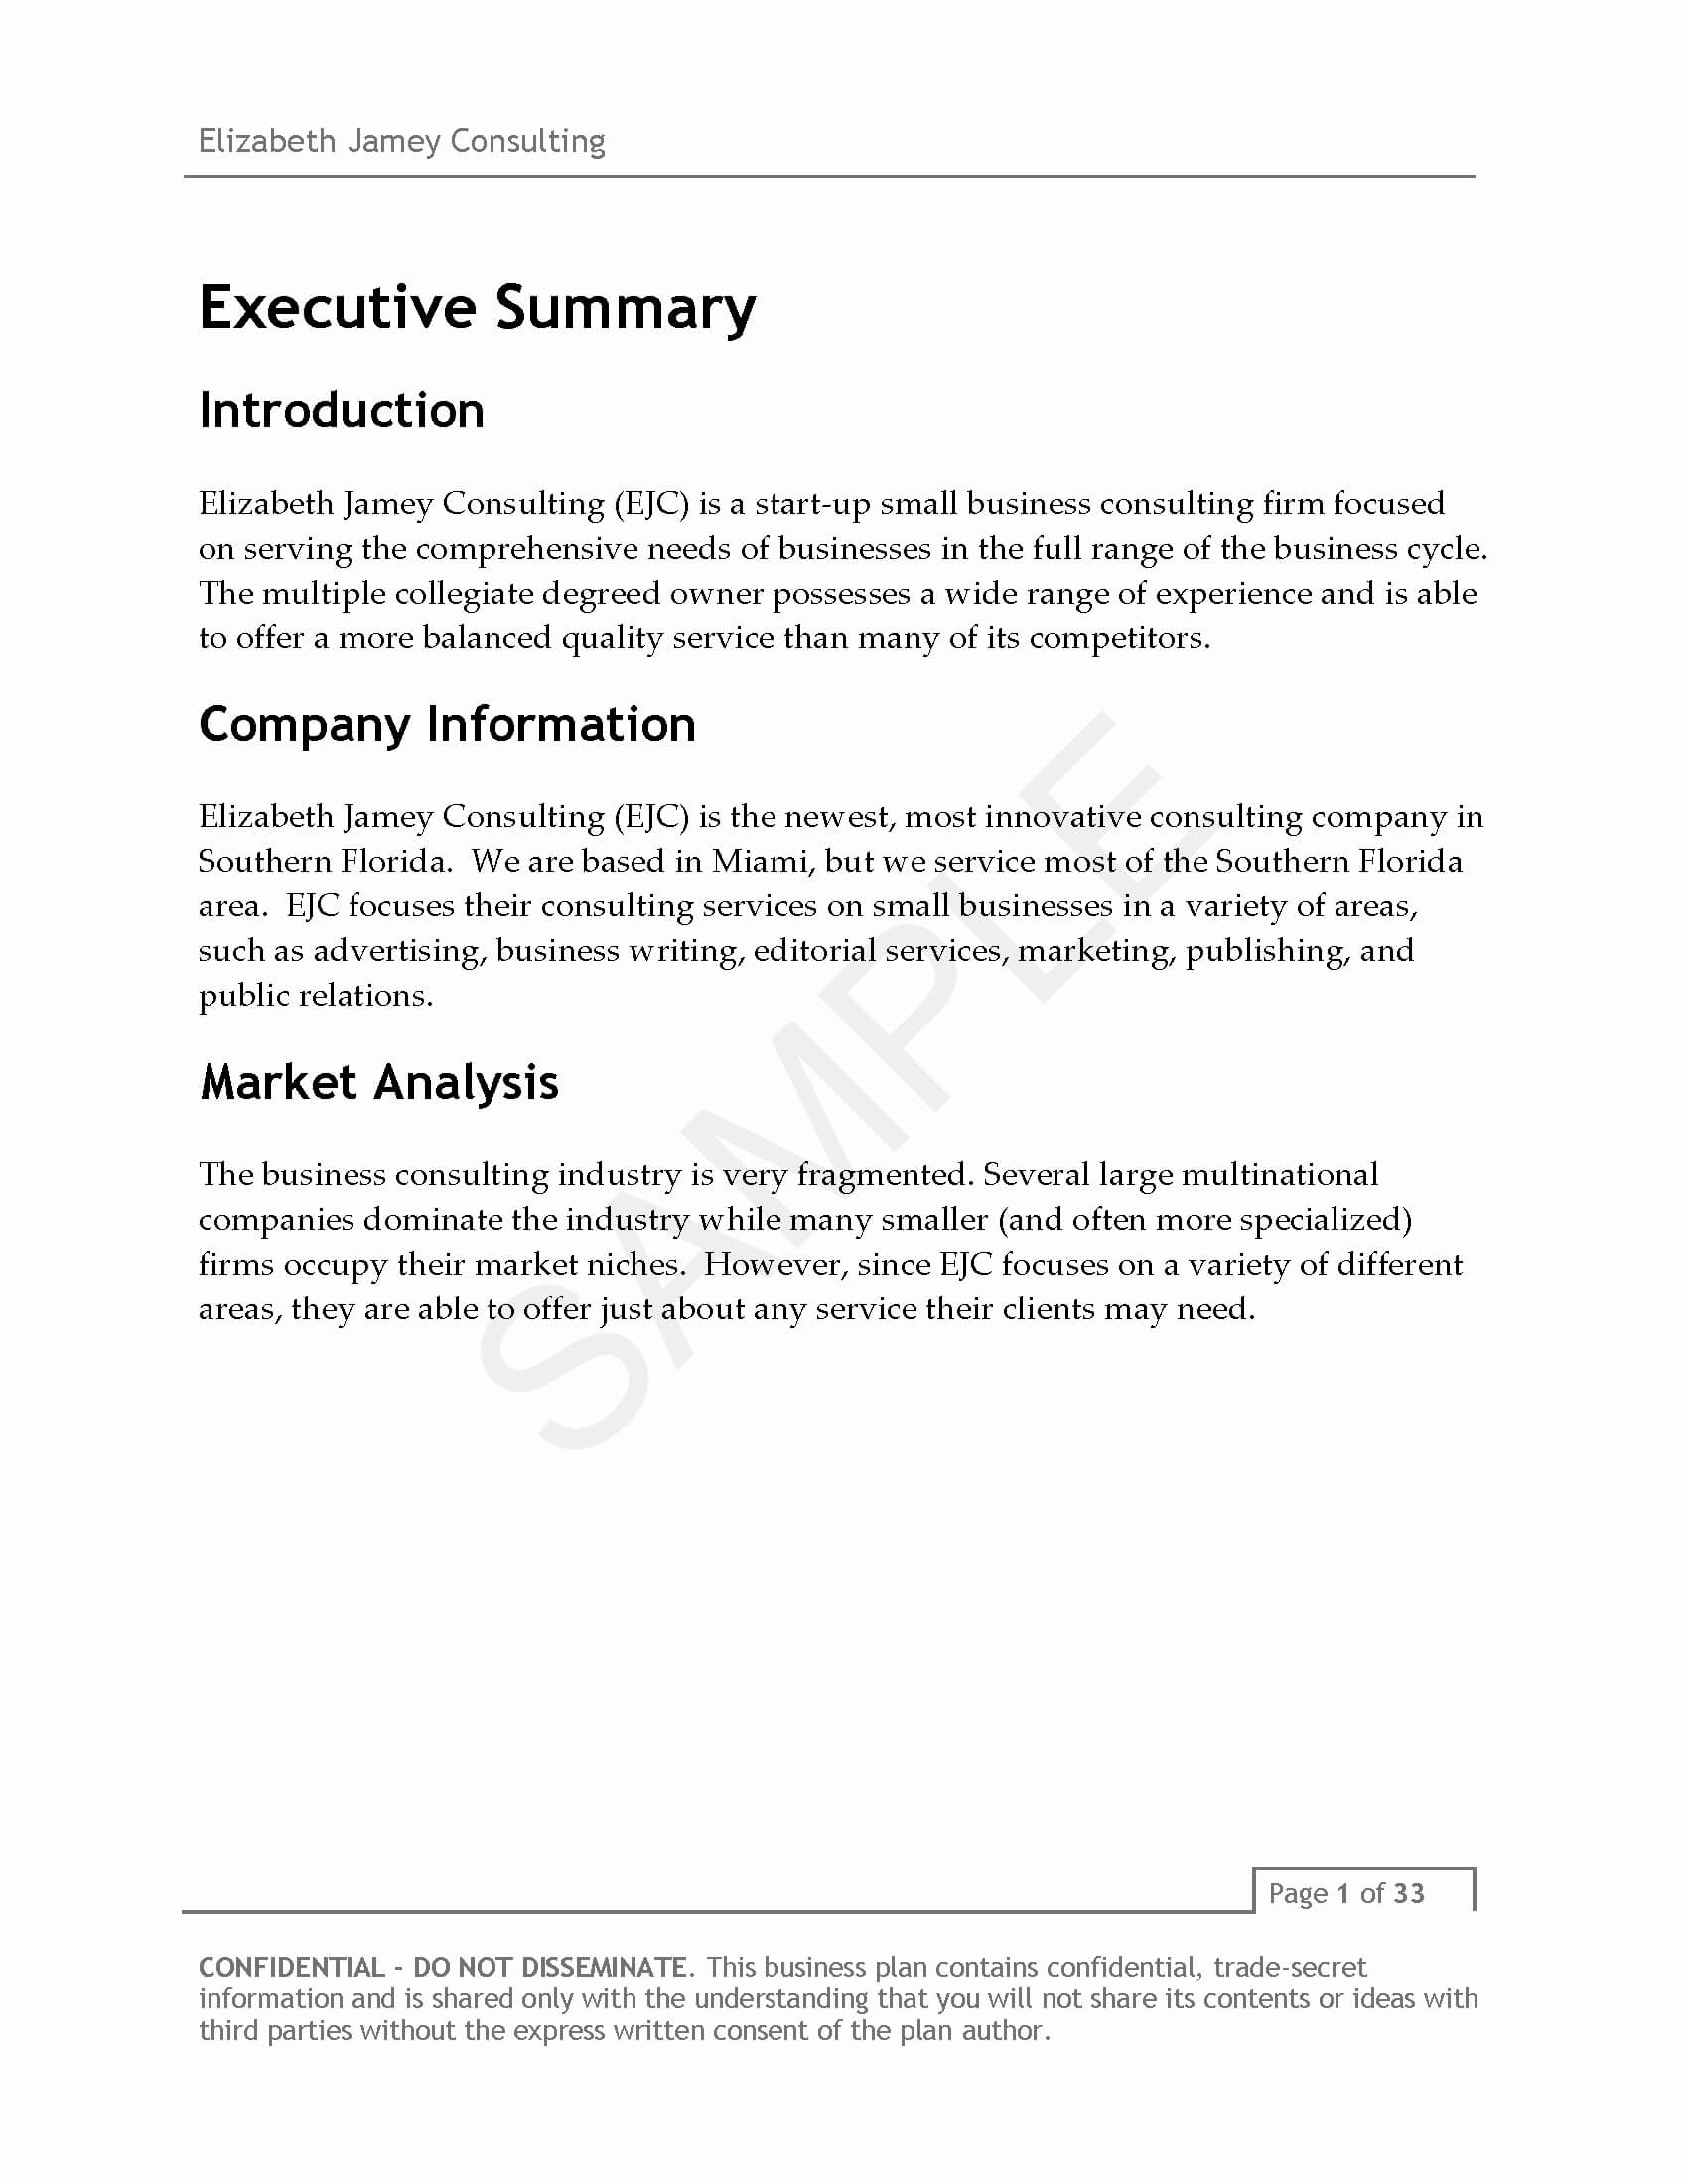 013 Consulting Business Plan Template 20Consulting Company Pertaining To Business Plan Template For Service Company